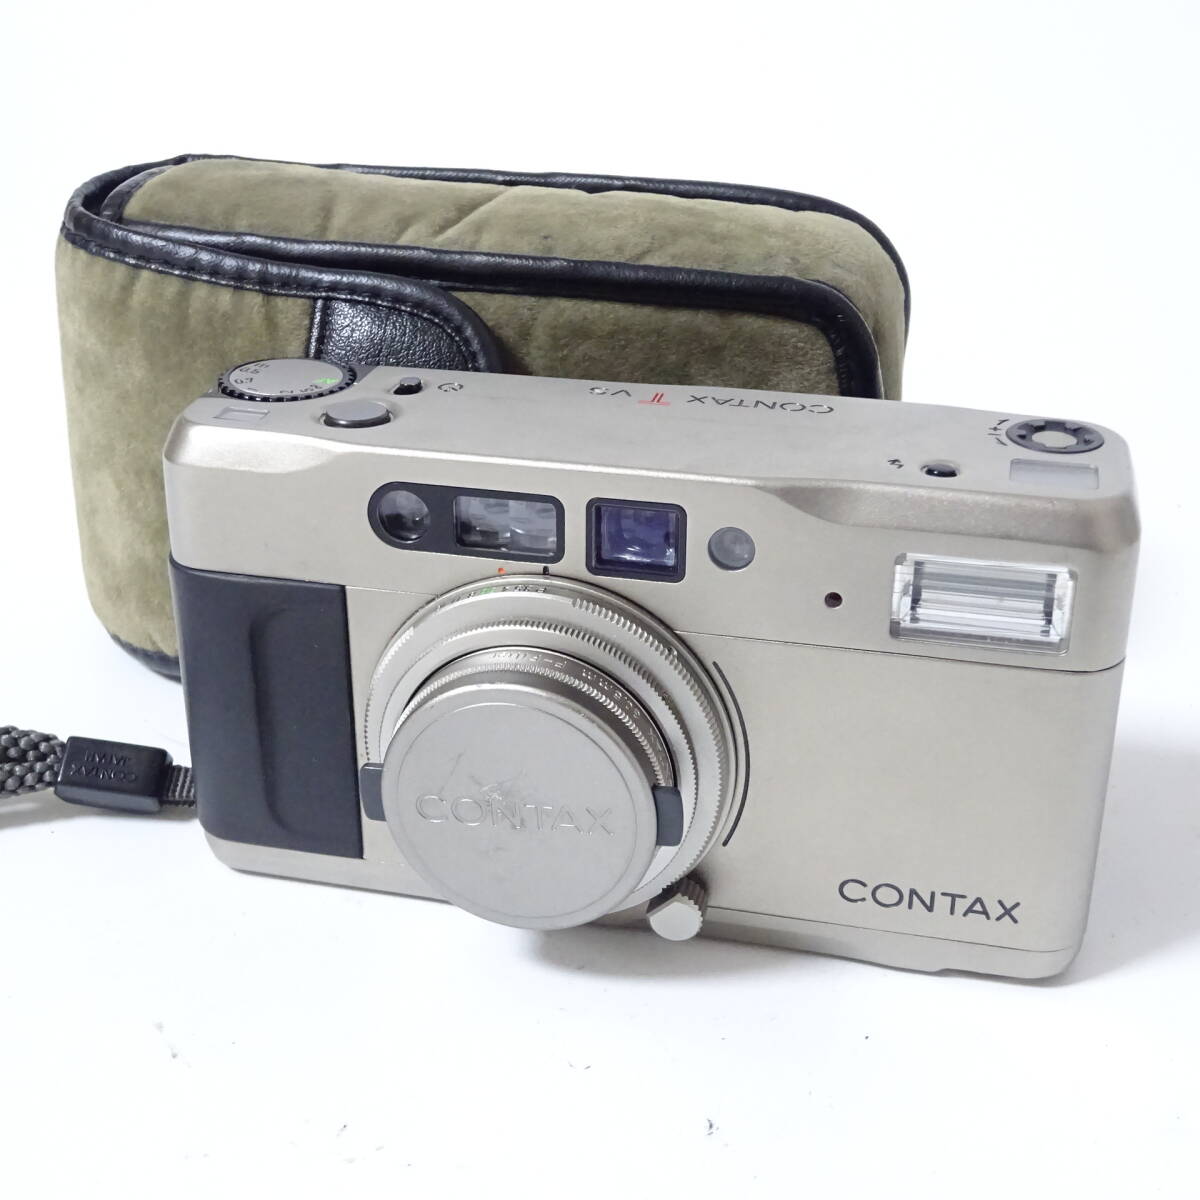 CONTAX Contax T VS compact film camera operation not yet verification 60 size shipping K-2620182-209-mrrz